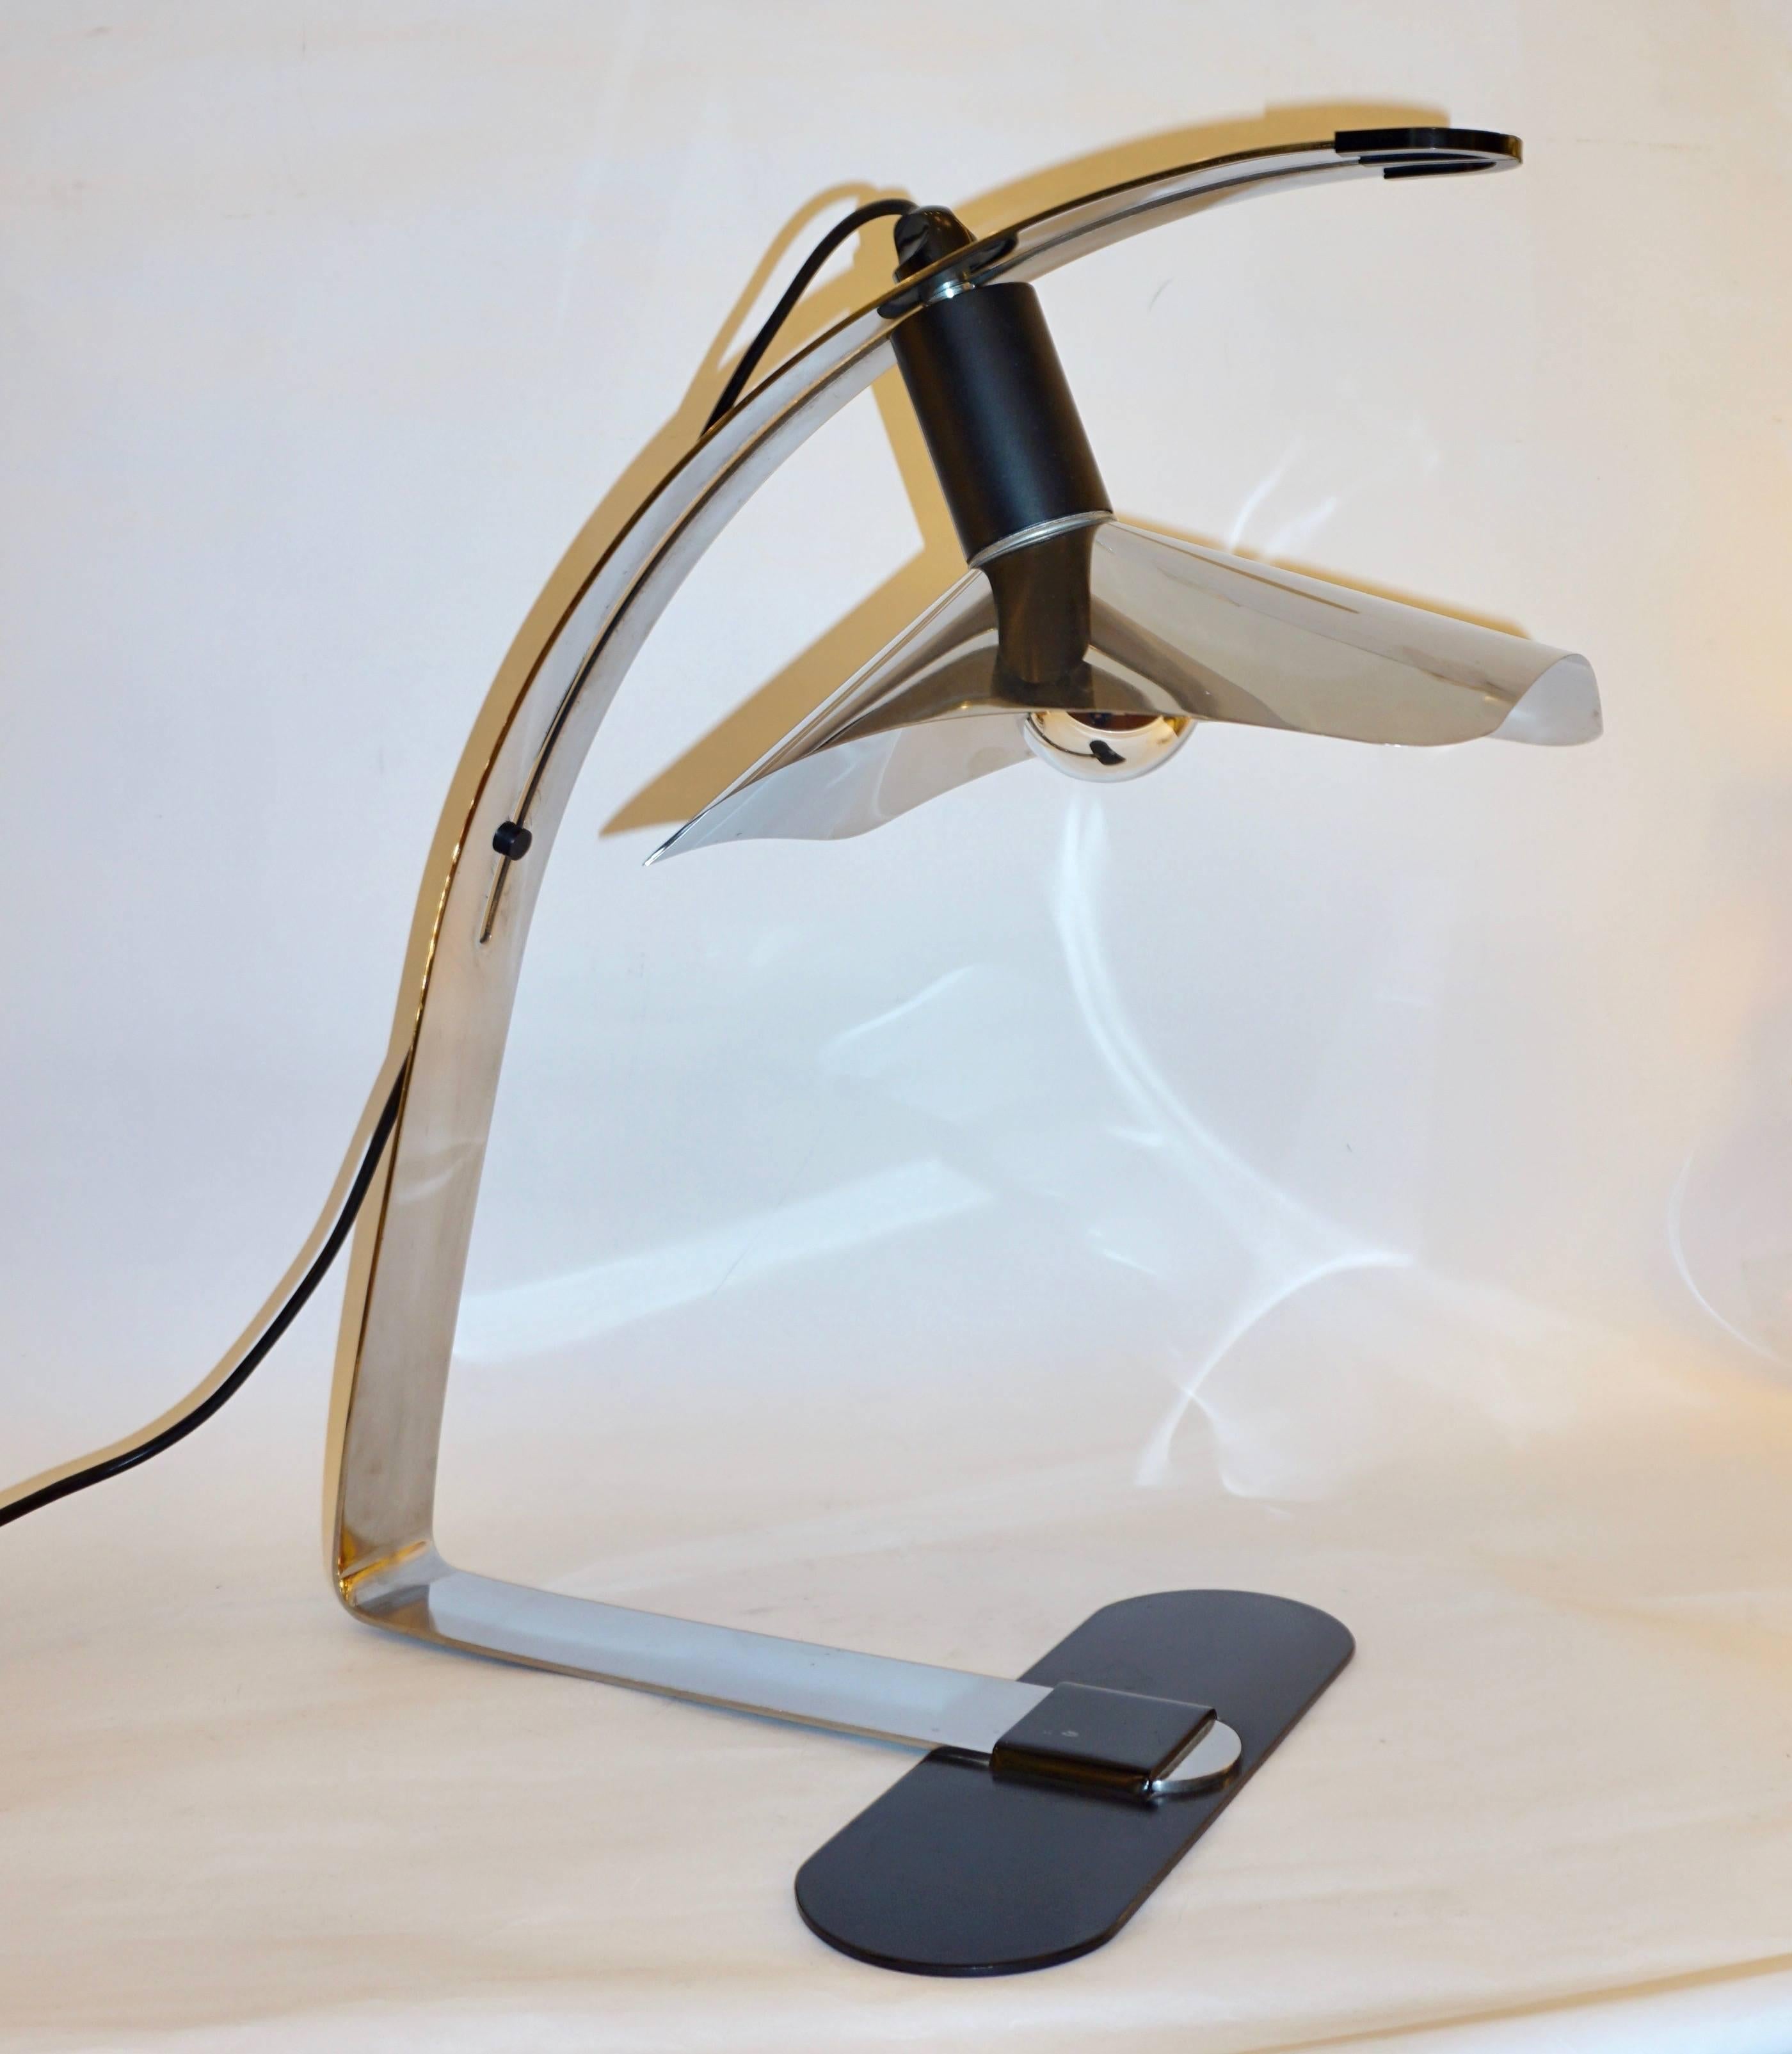 Italian desk lamp, named Corolla, designed by Grignani for the Italian lighting Company Luci, circa 1970. The open polished chrome color shade is movable on an arched arm, giving practicality and flexibility to the source of illumination, the sleek